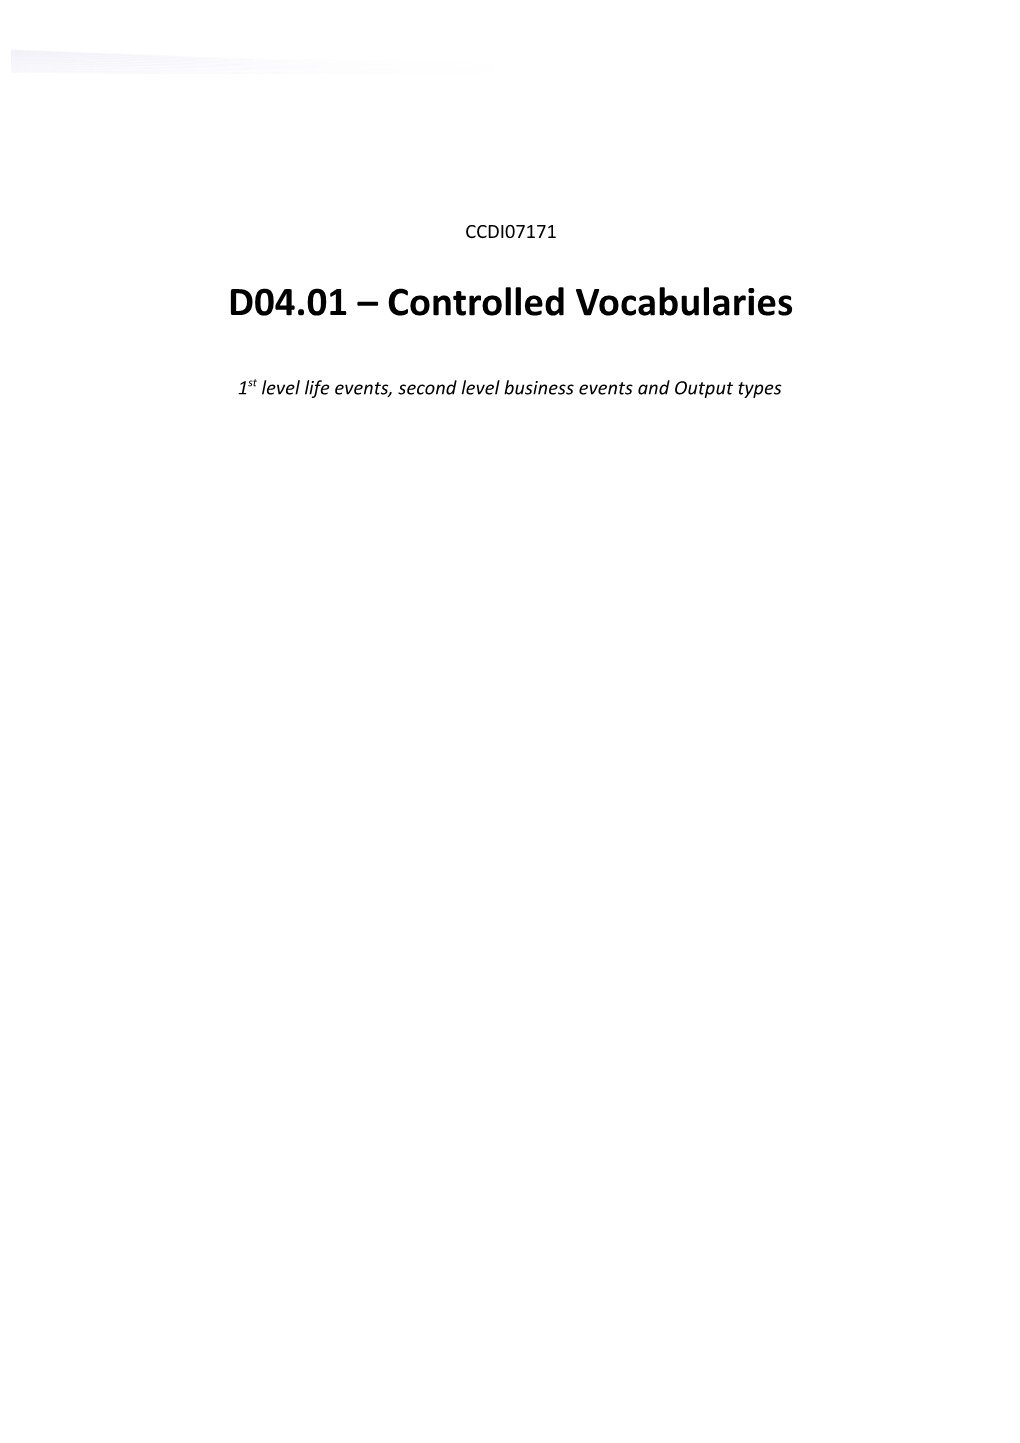 D04.01 Controlled Vocabularies